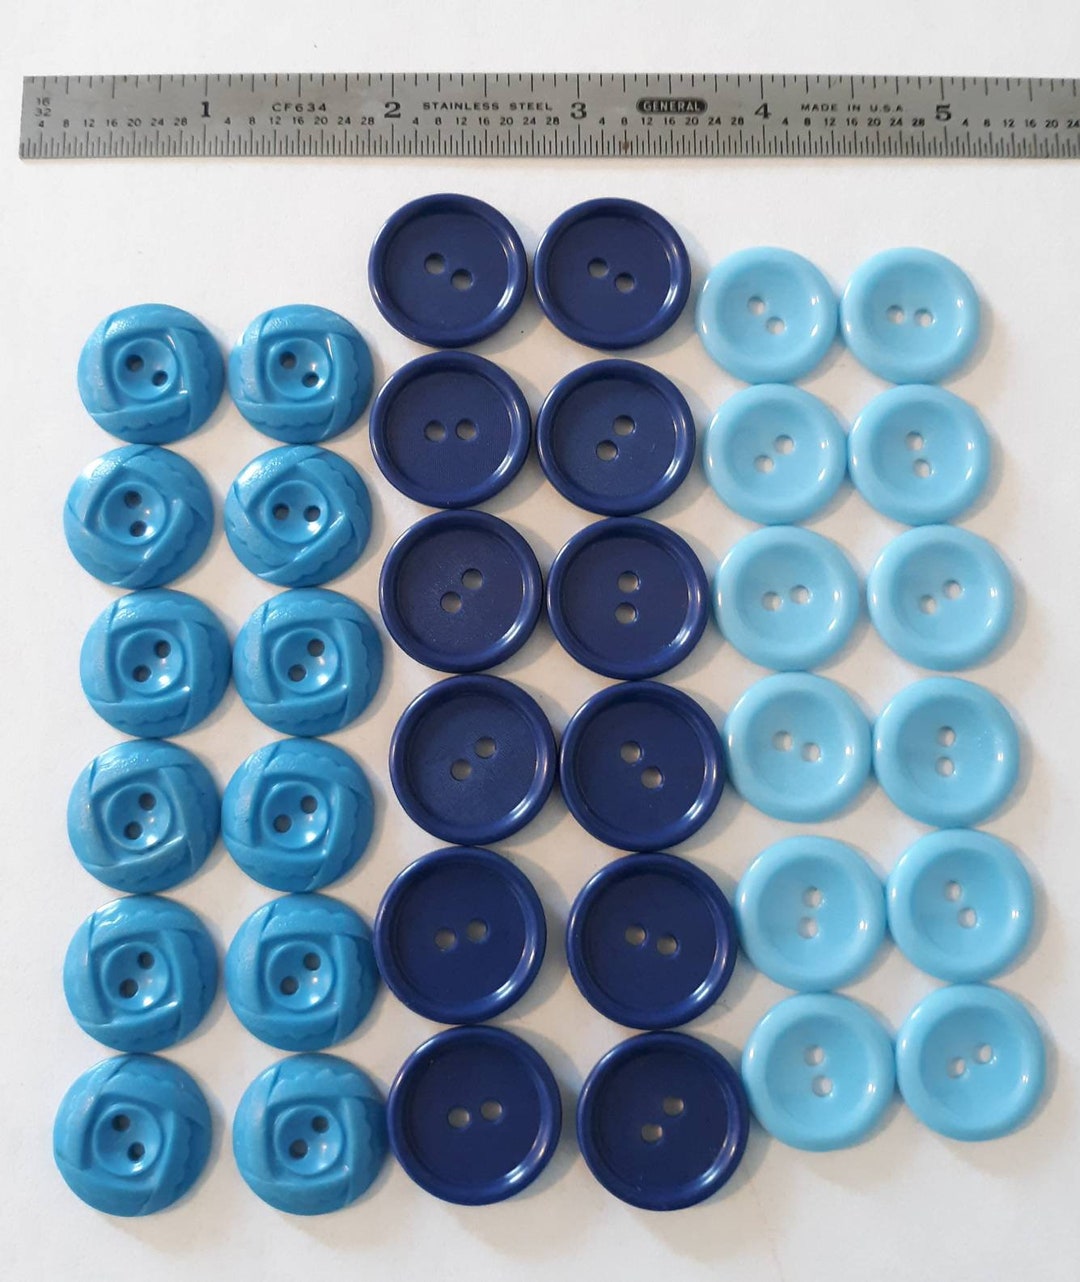 Vintage Red, White & Blue Buttons (Pack of 12)